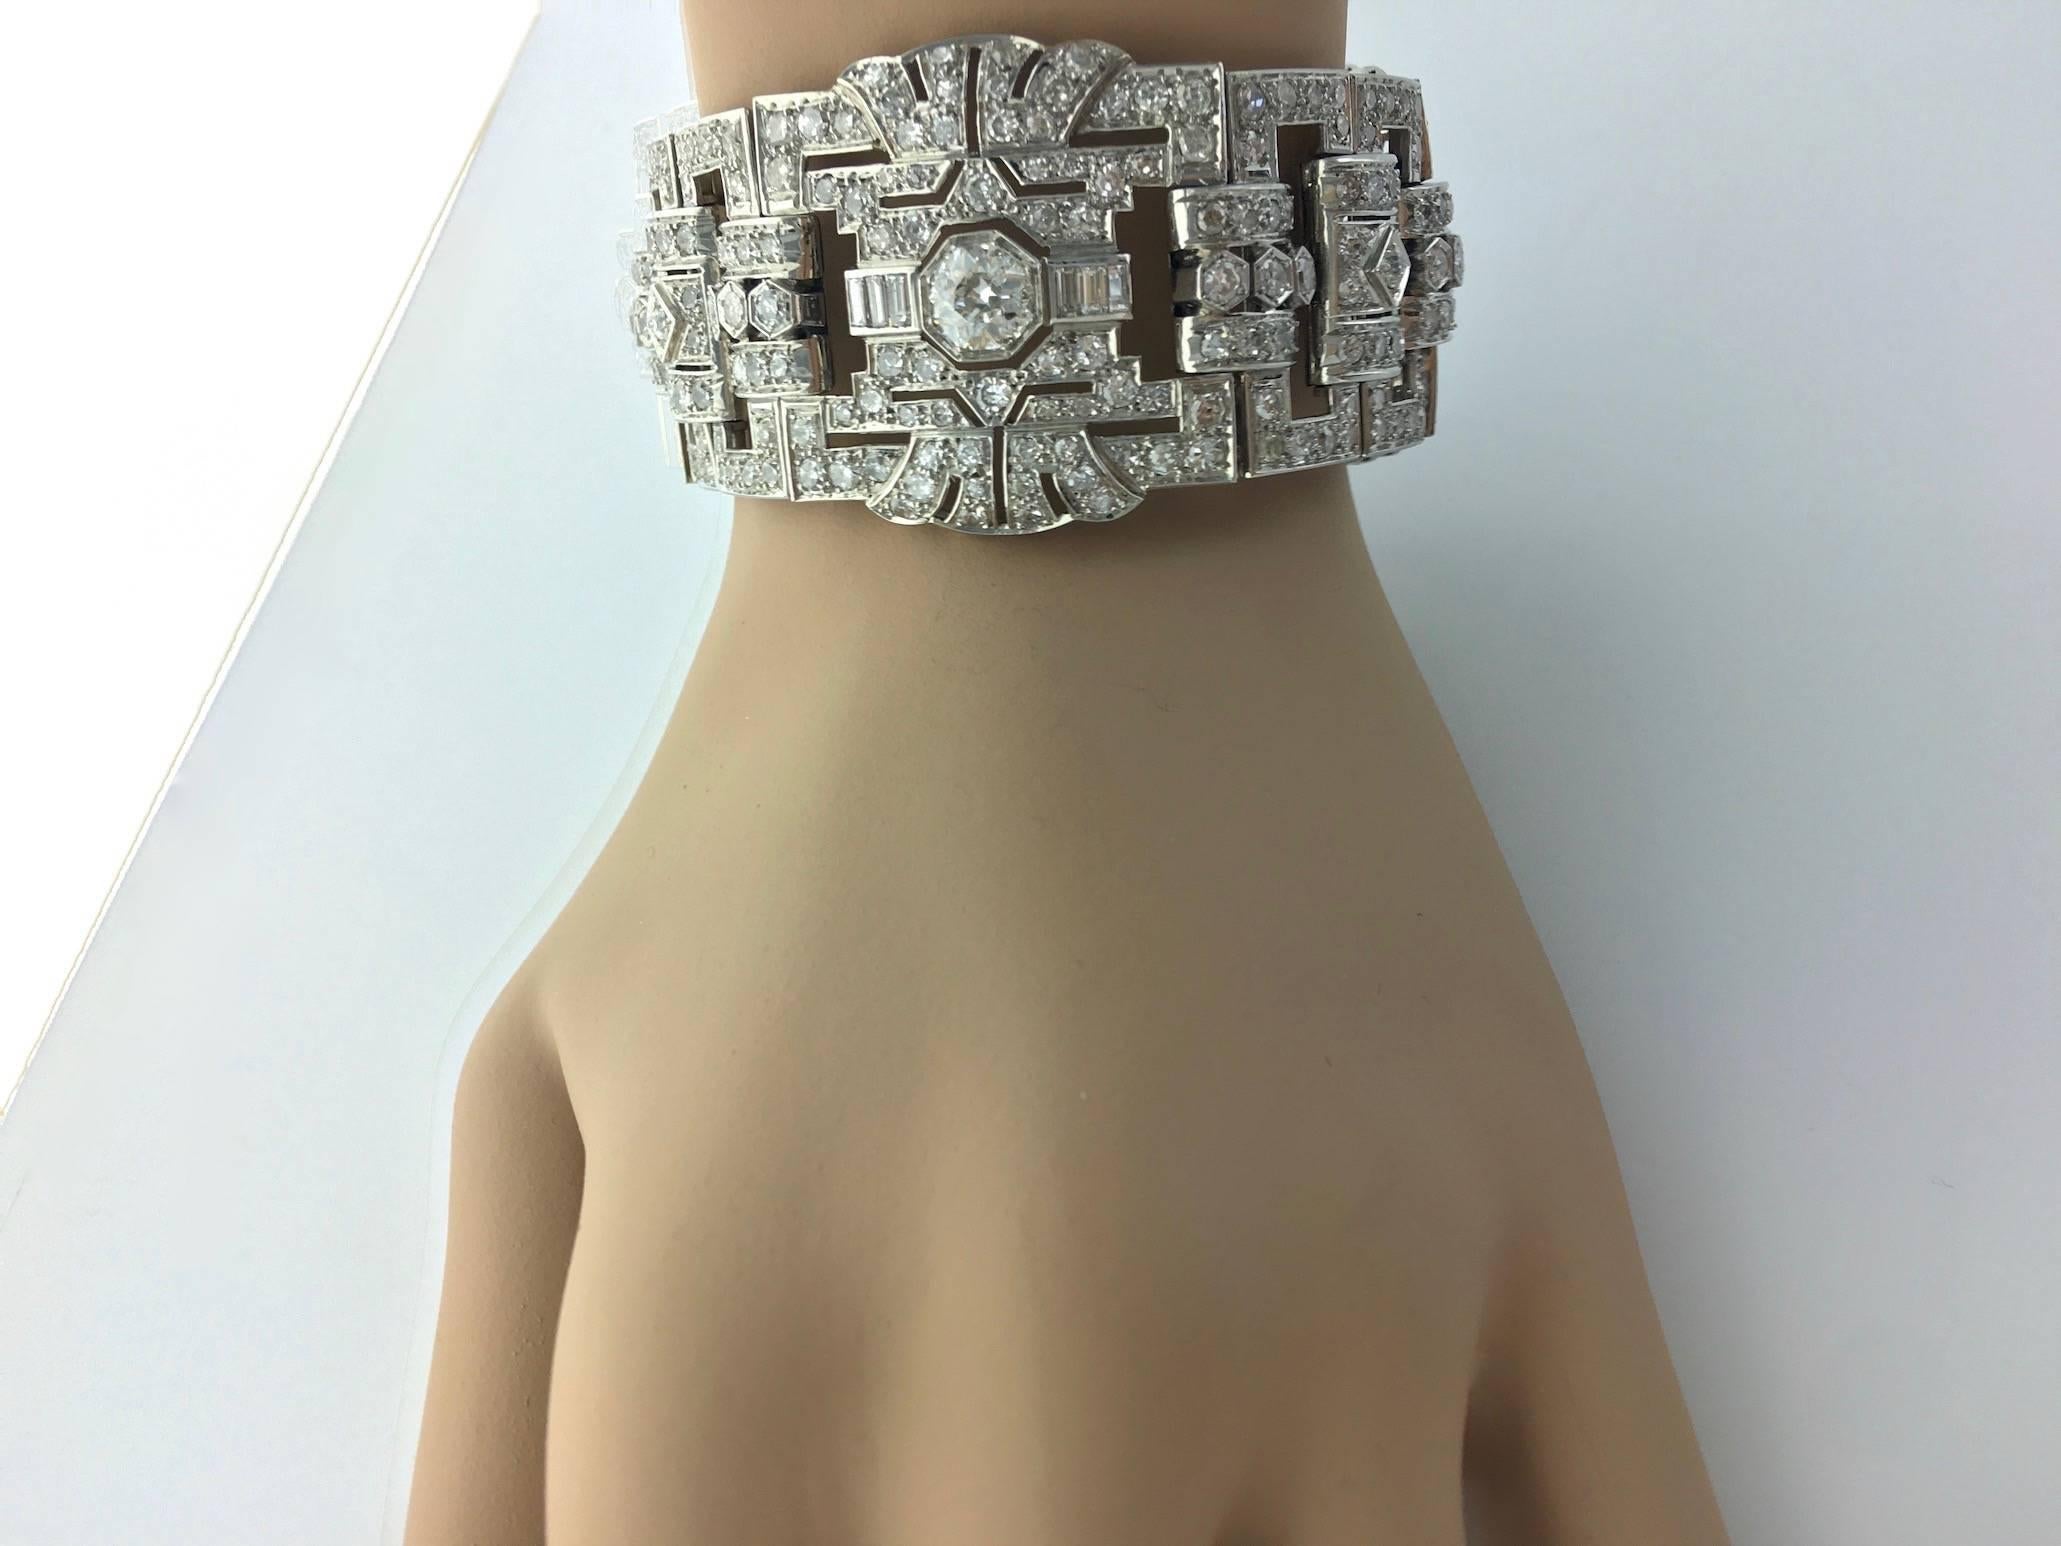 Again and Always this significant bracelet shows how the Art Deco period was prolific.
All platinum and Old-mine cut Diamond. 
We estimate a total weight approx. 20.- carats.

Length: 7.09 inches.
Width: 1.18 inches.
French marks.
Circa